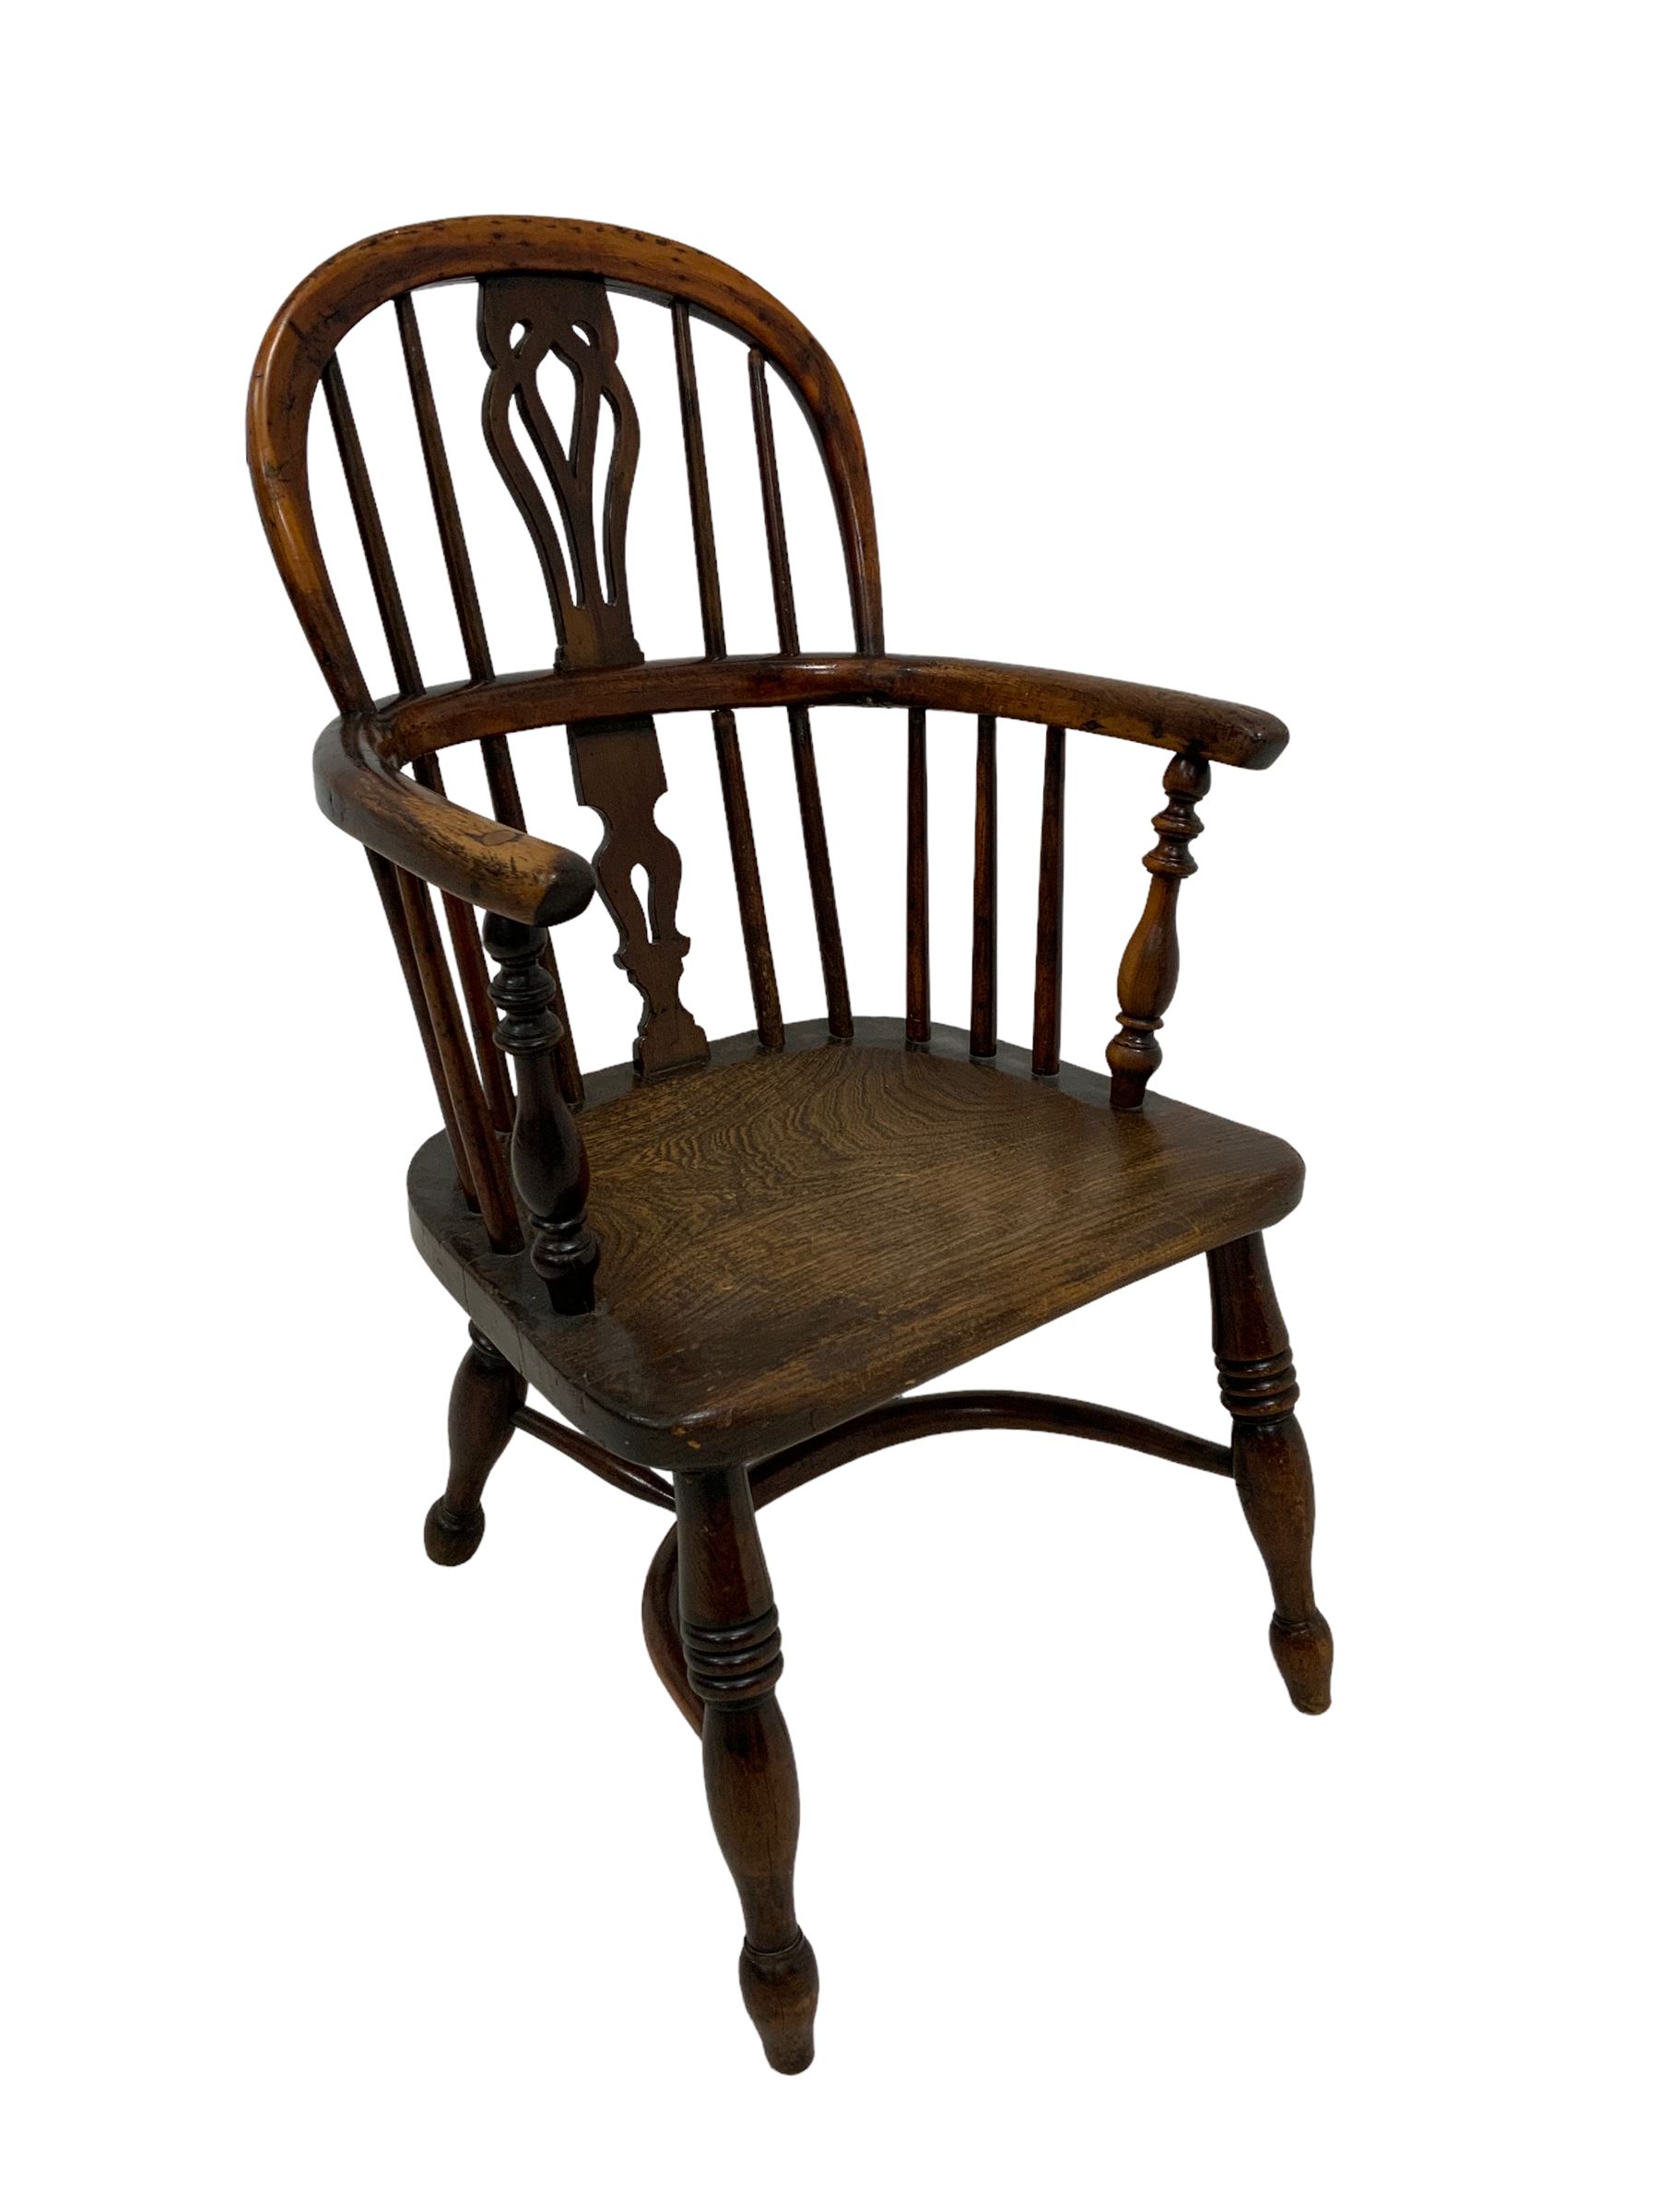 19th century elm and yew child's Windsor chair - Image 3 of 7